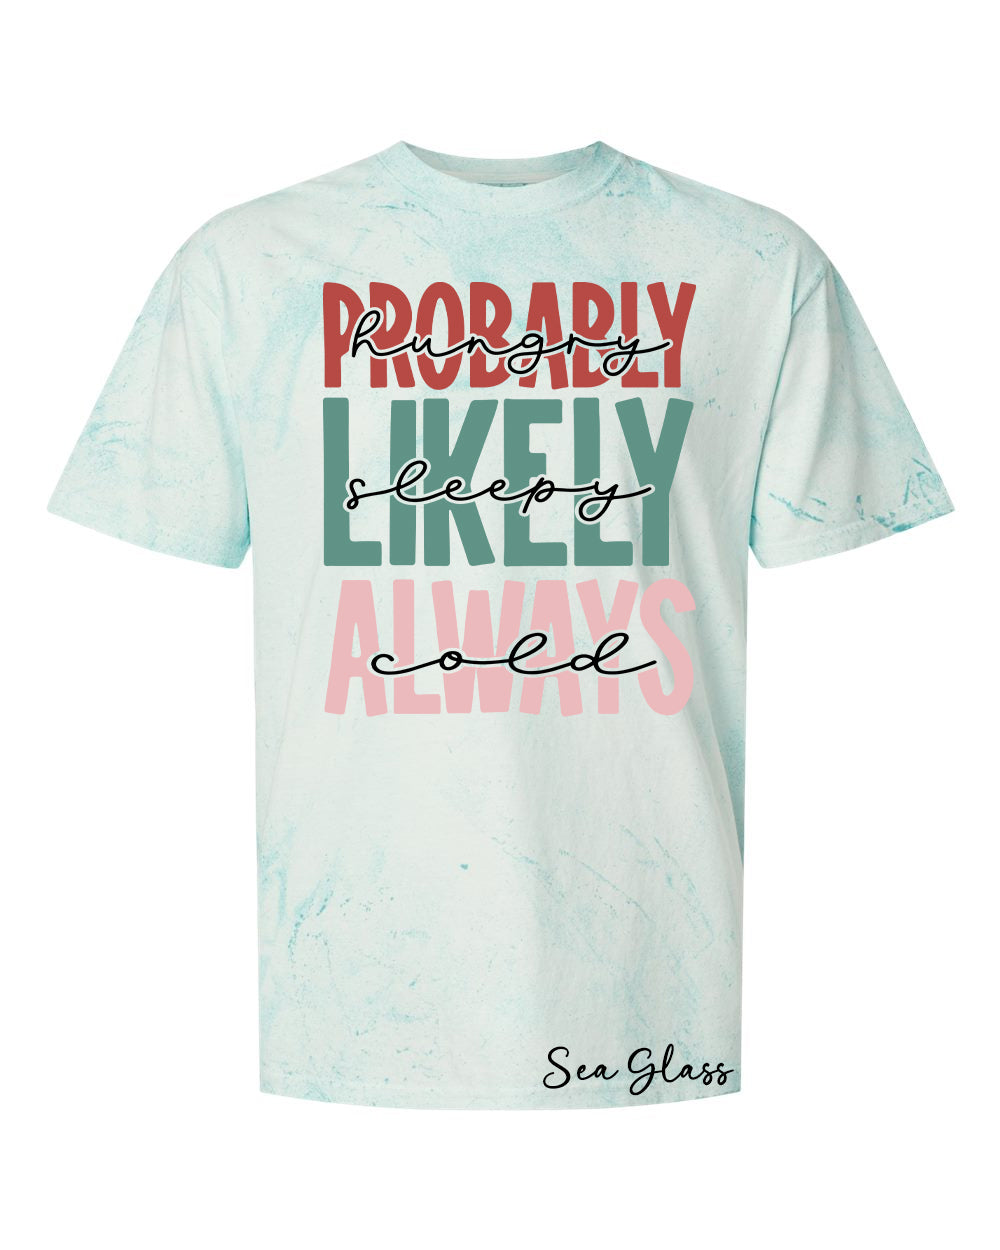 Probably Hungry Likely Sleepy Always Cold Graphic Tee